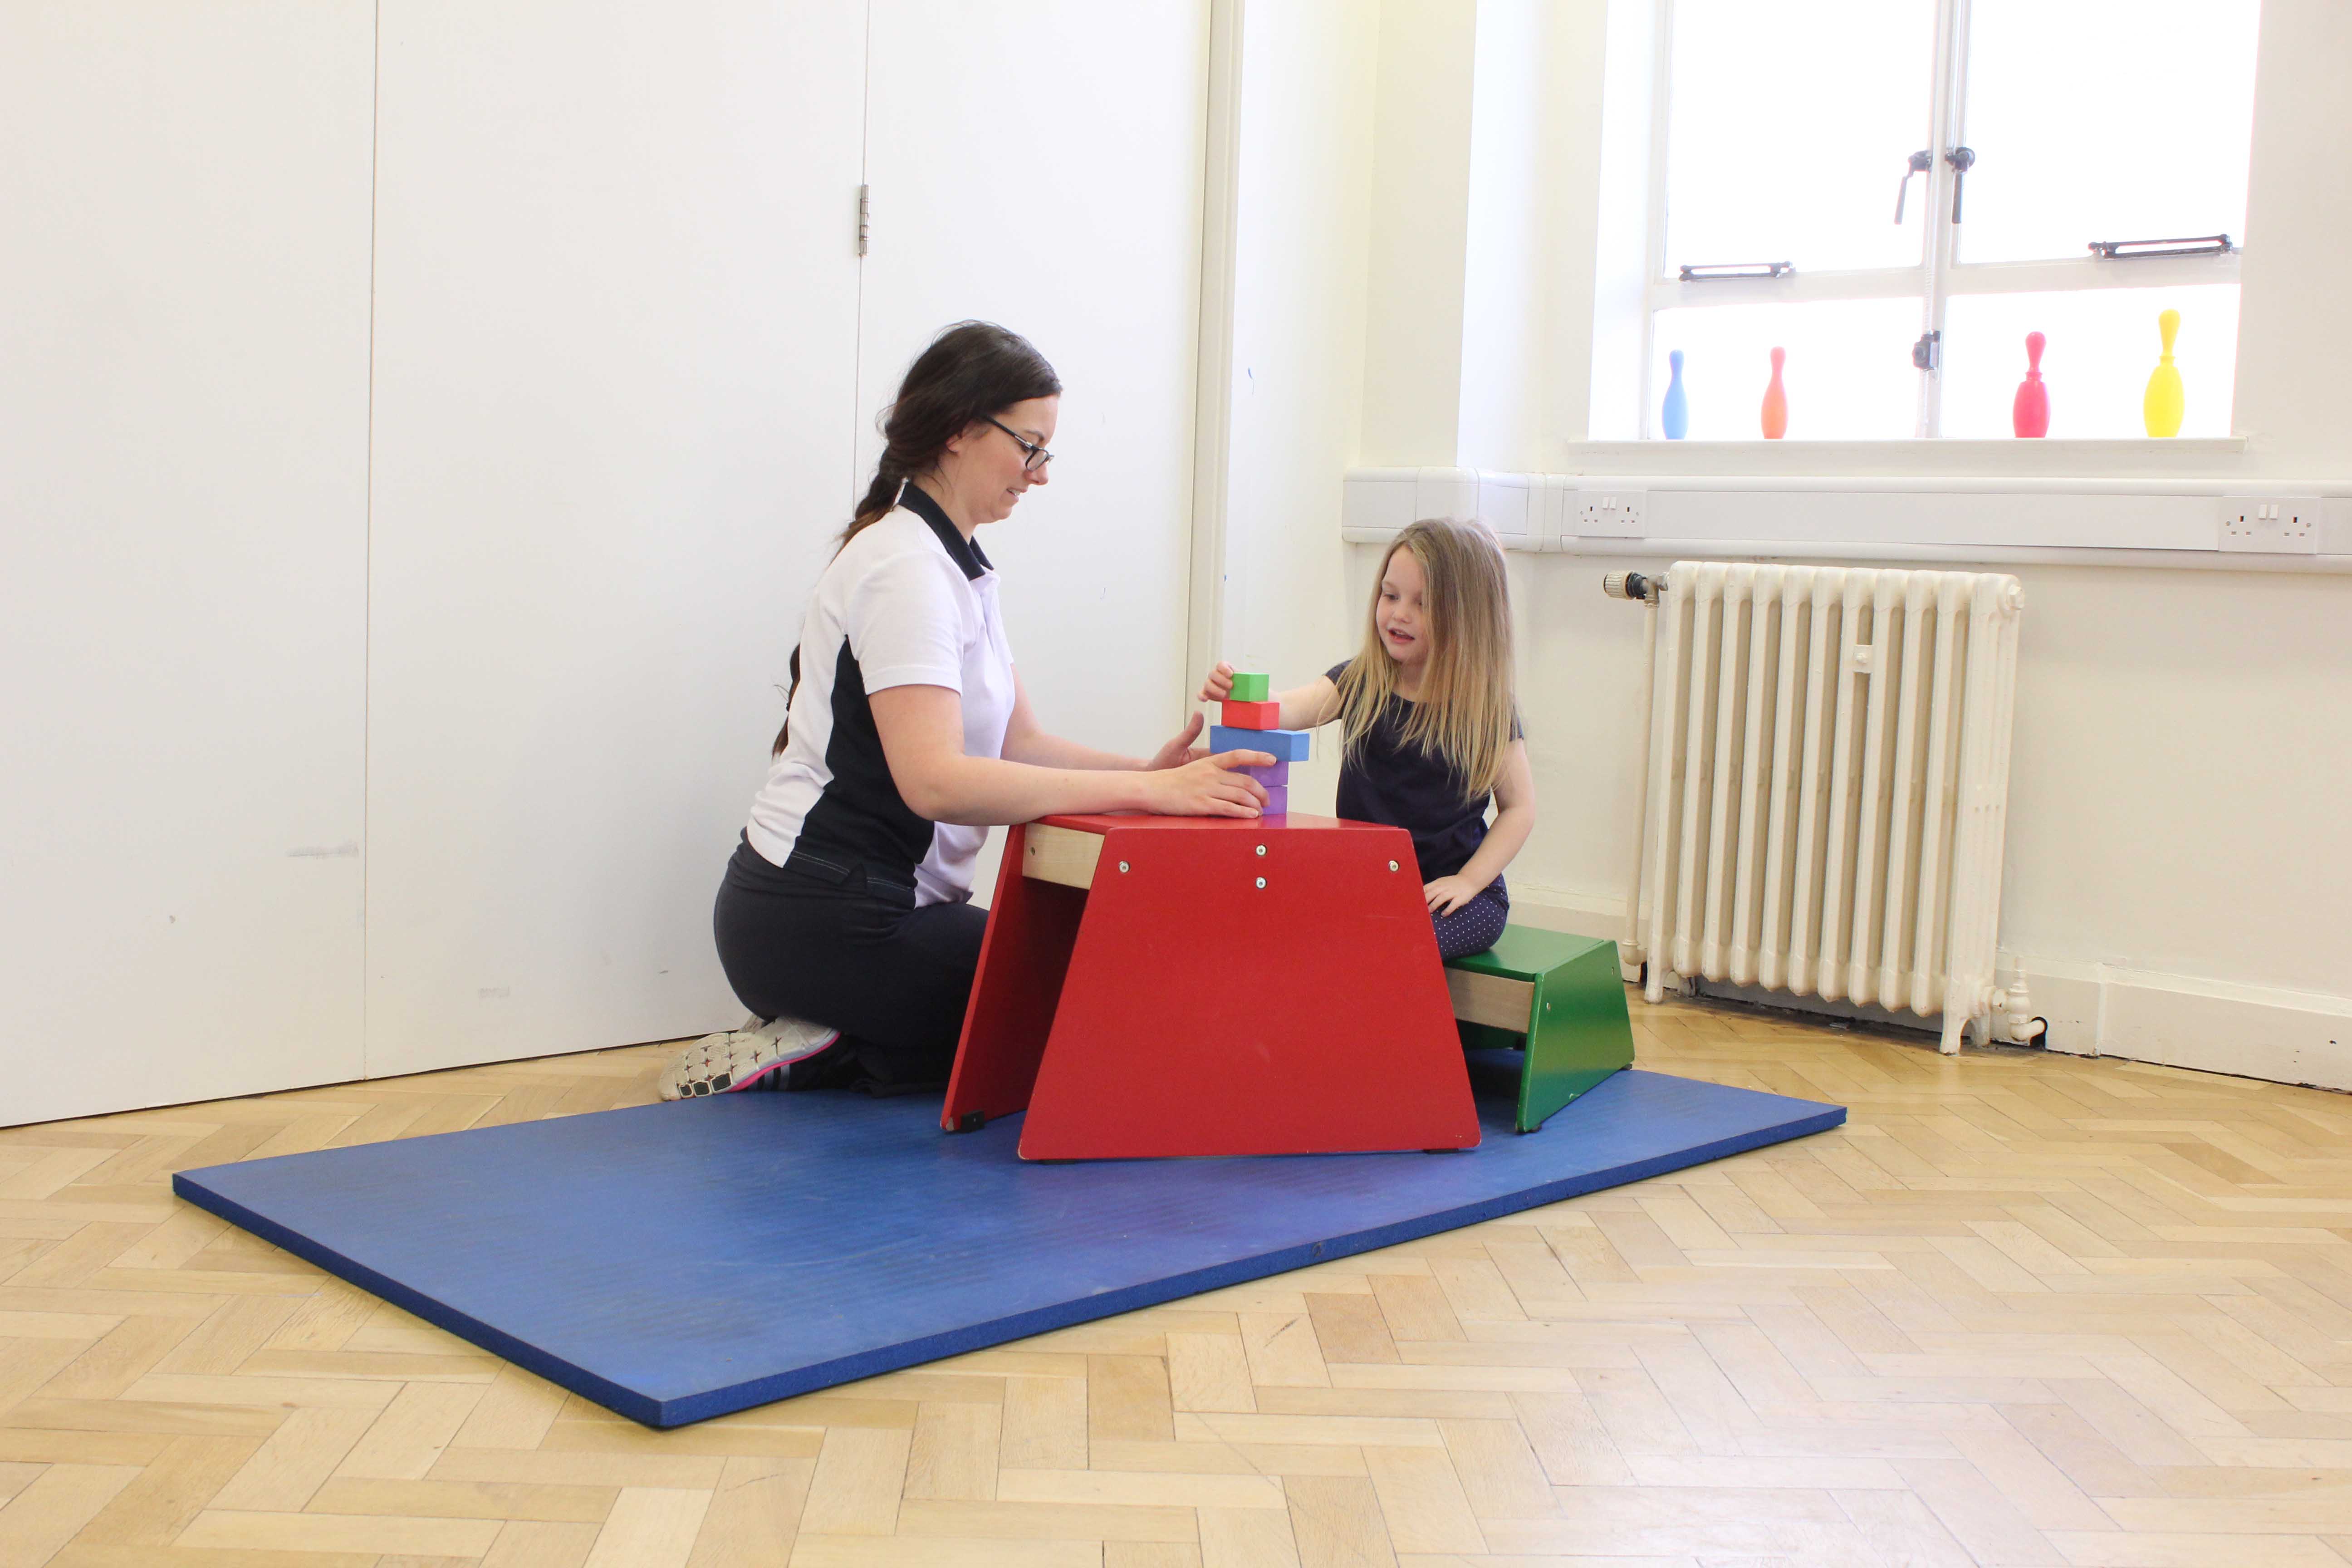 Improving sensory perception with fine motor skills under supervision from a physiotherapist